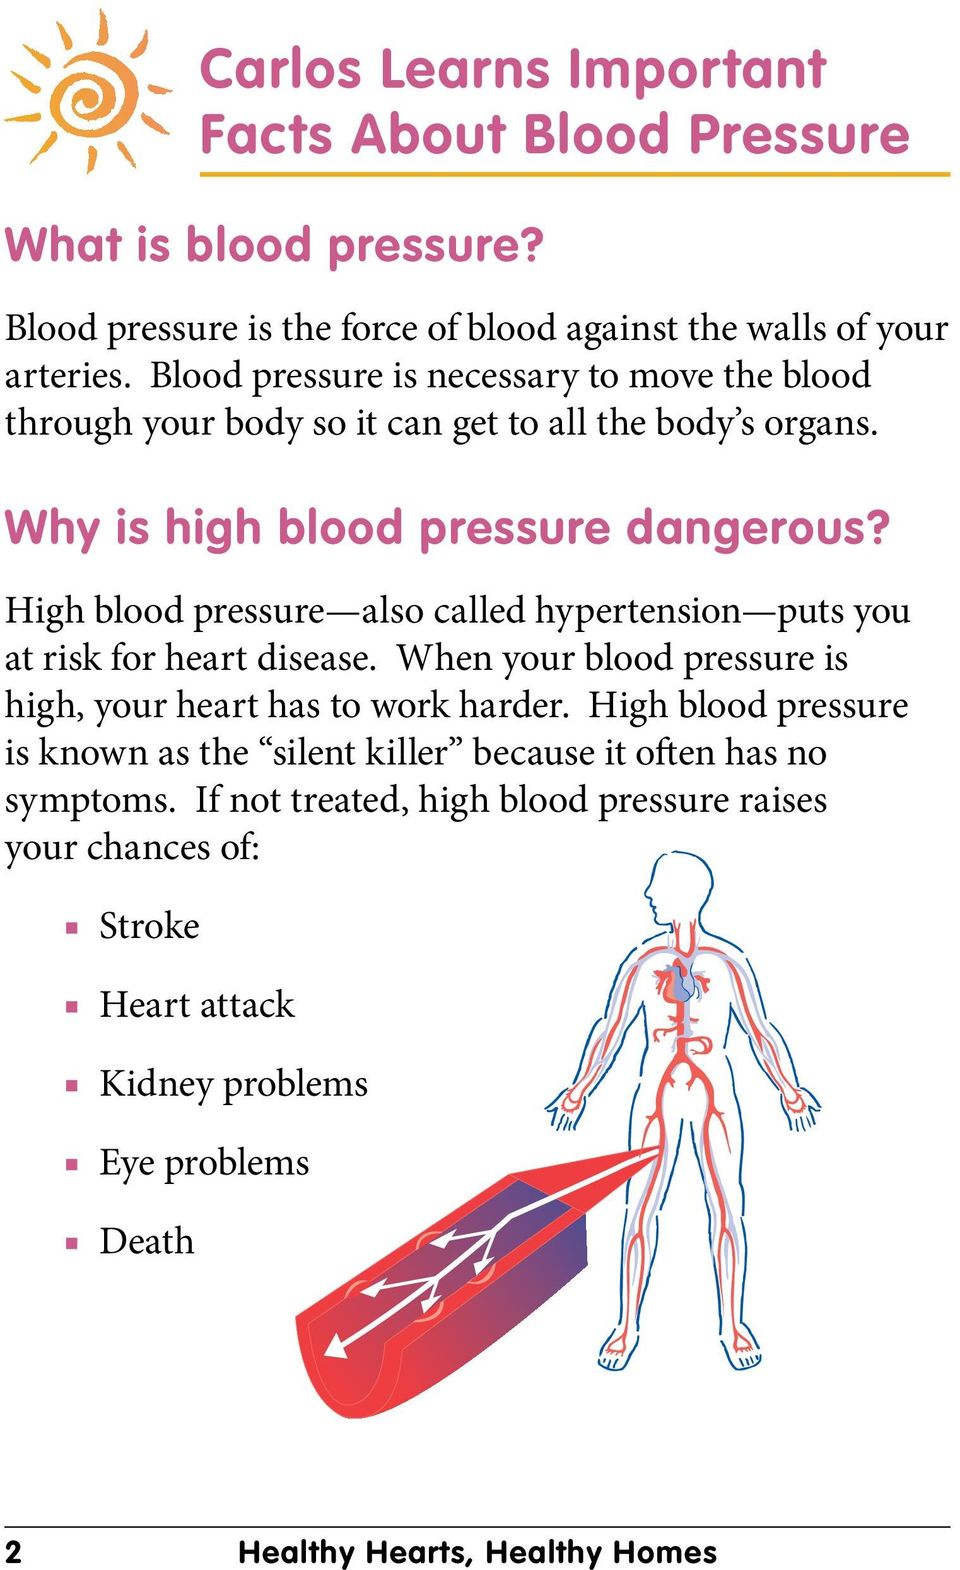 High blood pressure also called hypertension puts you at risk for heart disease. When your blood pressure is high, your heart has to work harder.